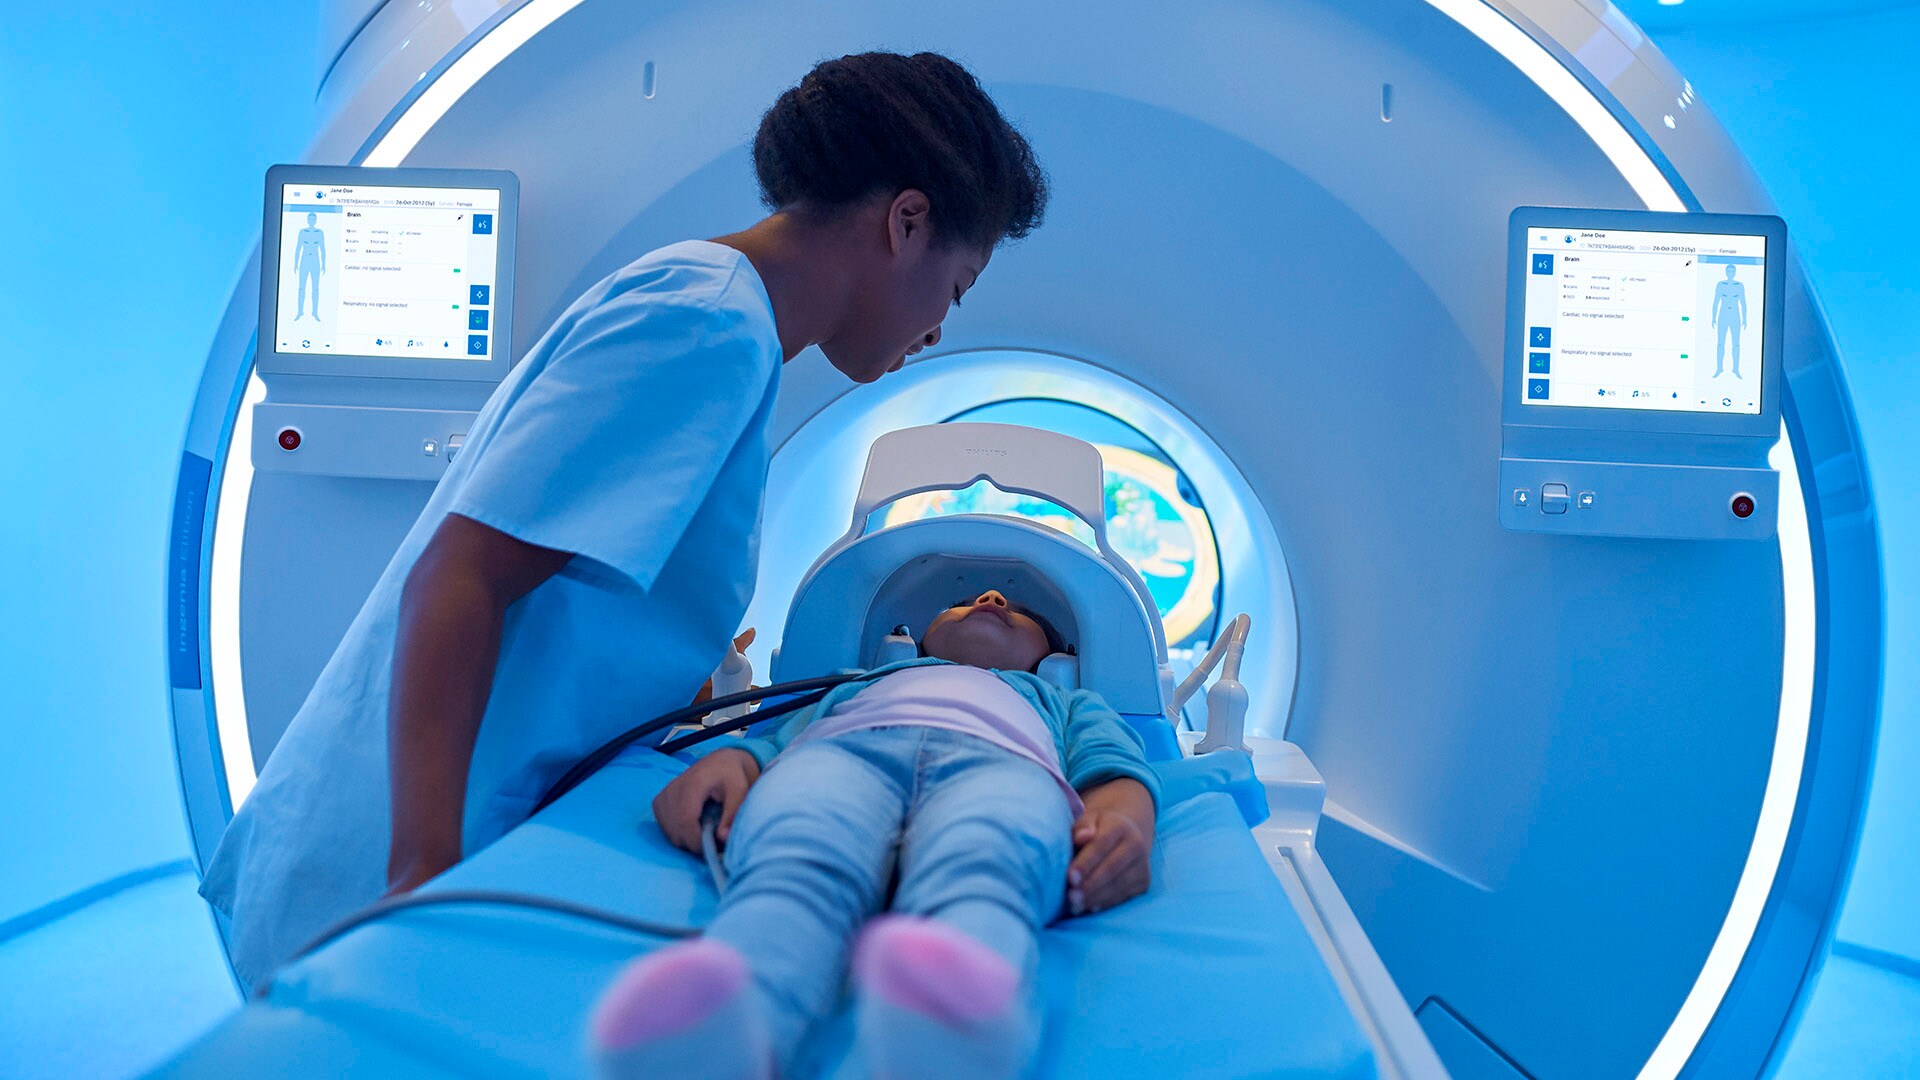 Seven innovations in radiology workflow that are improving efficiency and quality of care